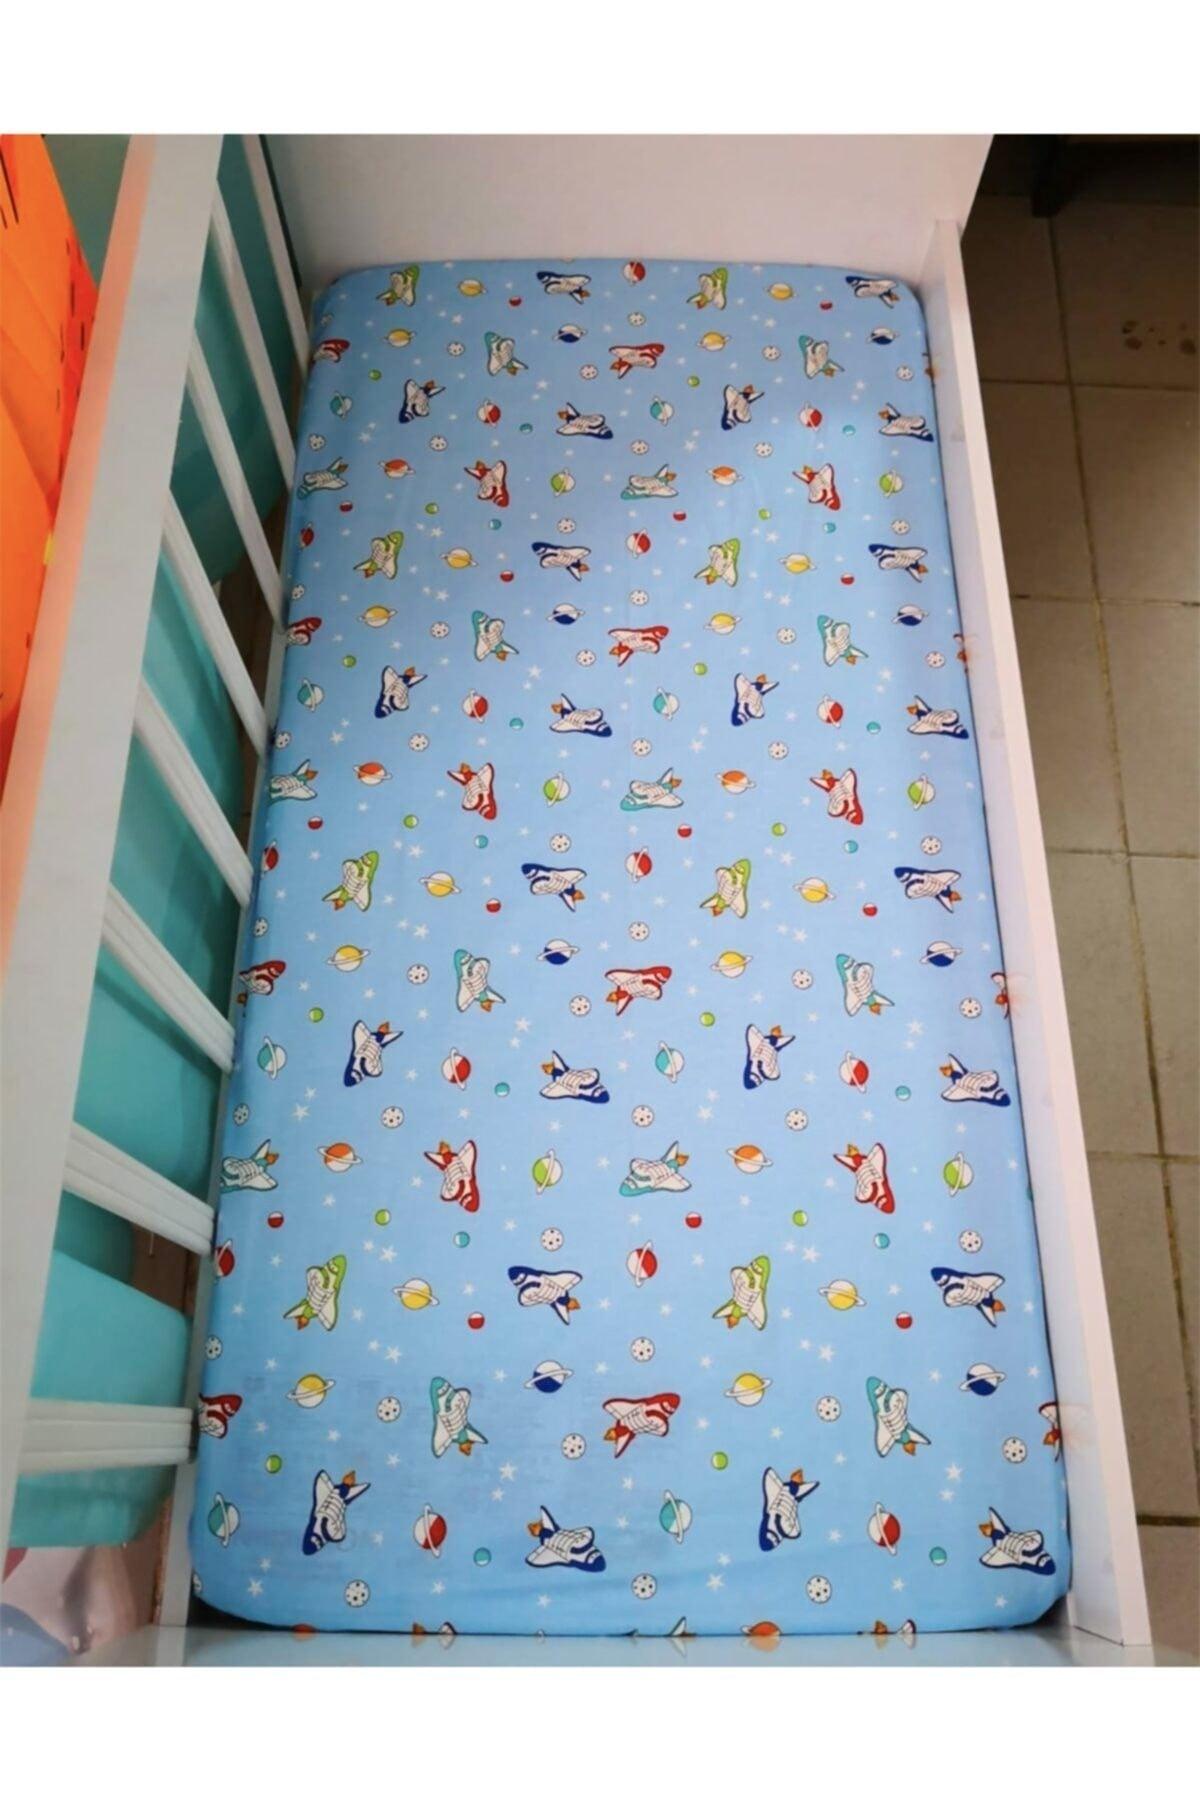 Cotton Kids Elastic Bed Sheet 120x200 cm 2 Pieces Car Traffic And Blue Galaxy - Swordslife